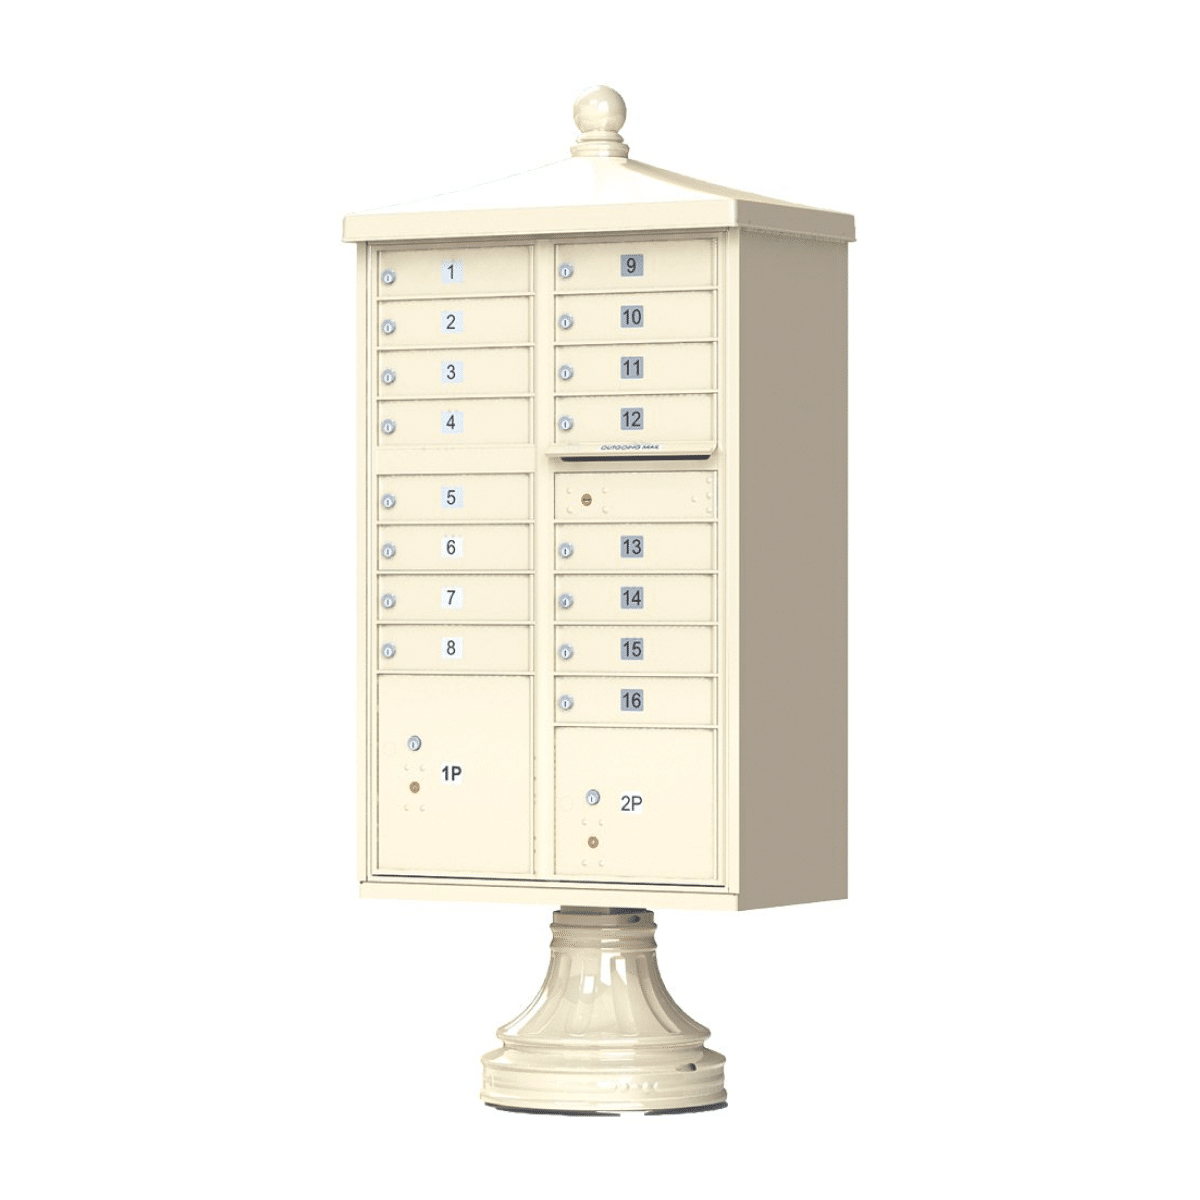 Florence CBU Cluster Mailbox – Vogue Traditional Kit, 16 Tenant Doors, 2 Parcel Lockers Product Image